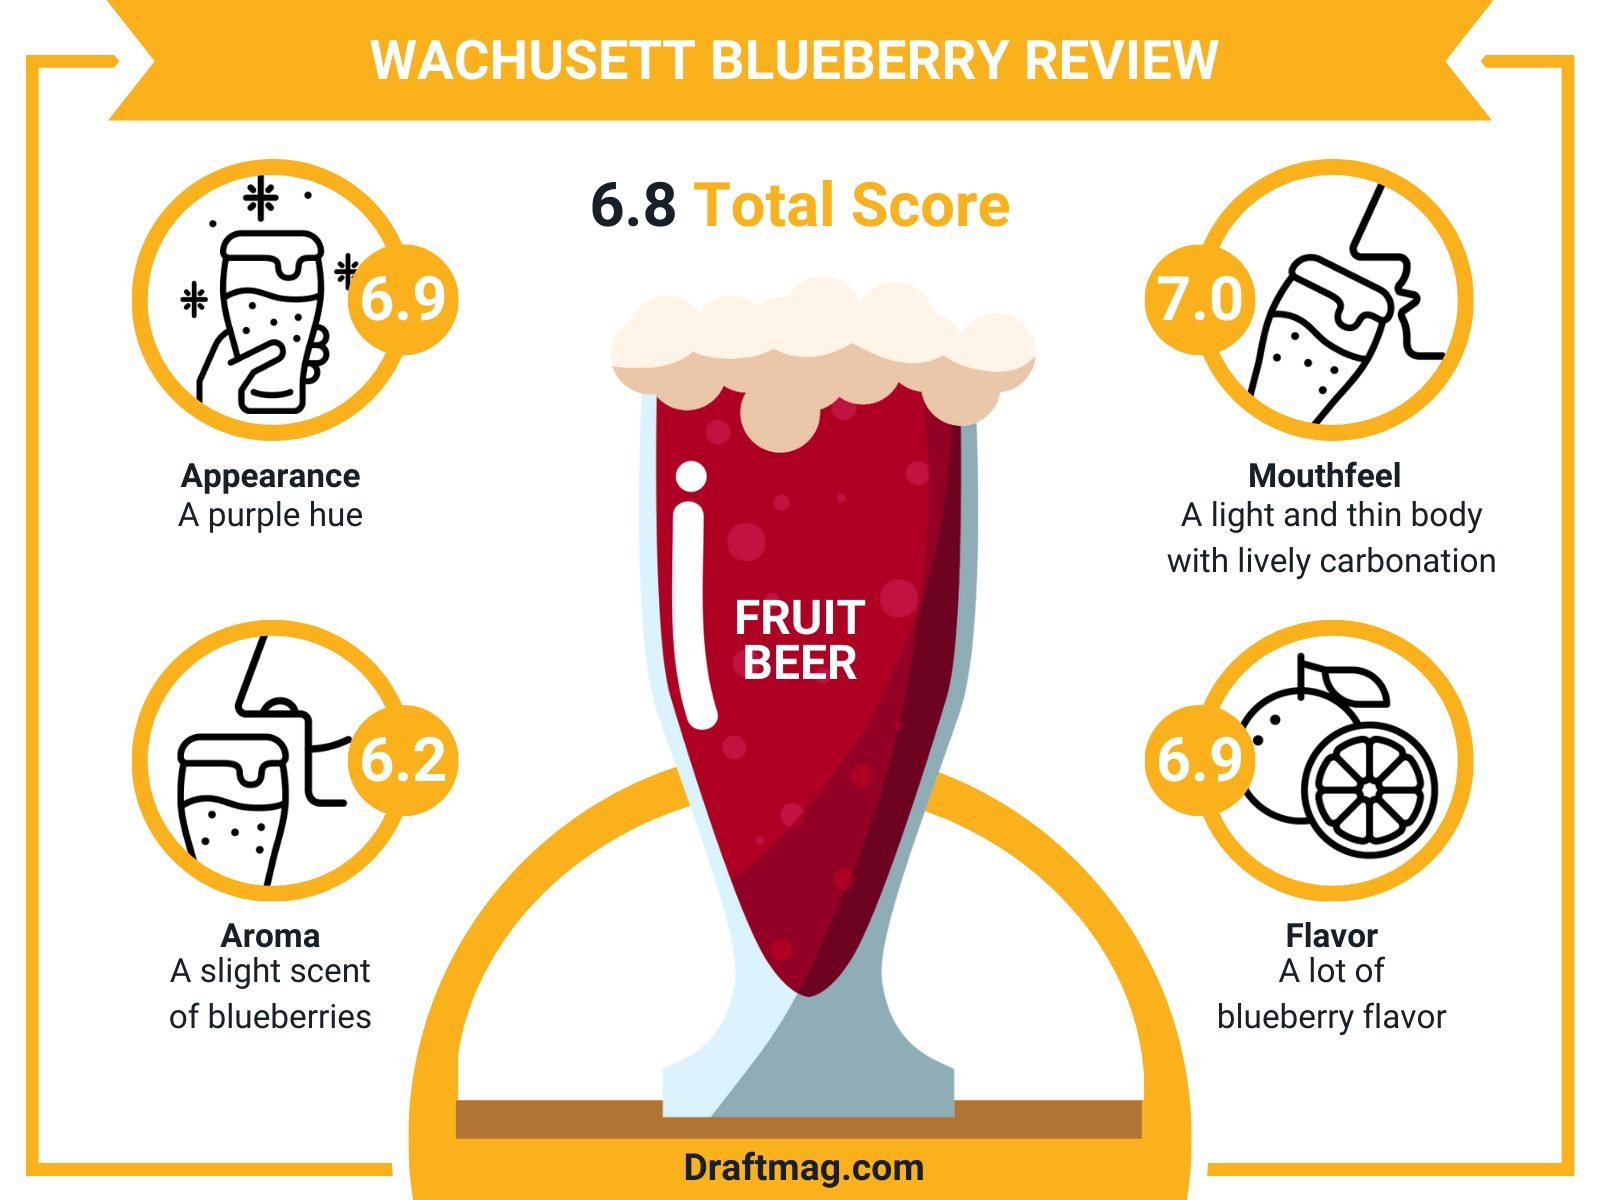 Wachusett Blueberry Review Infographic